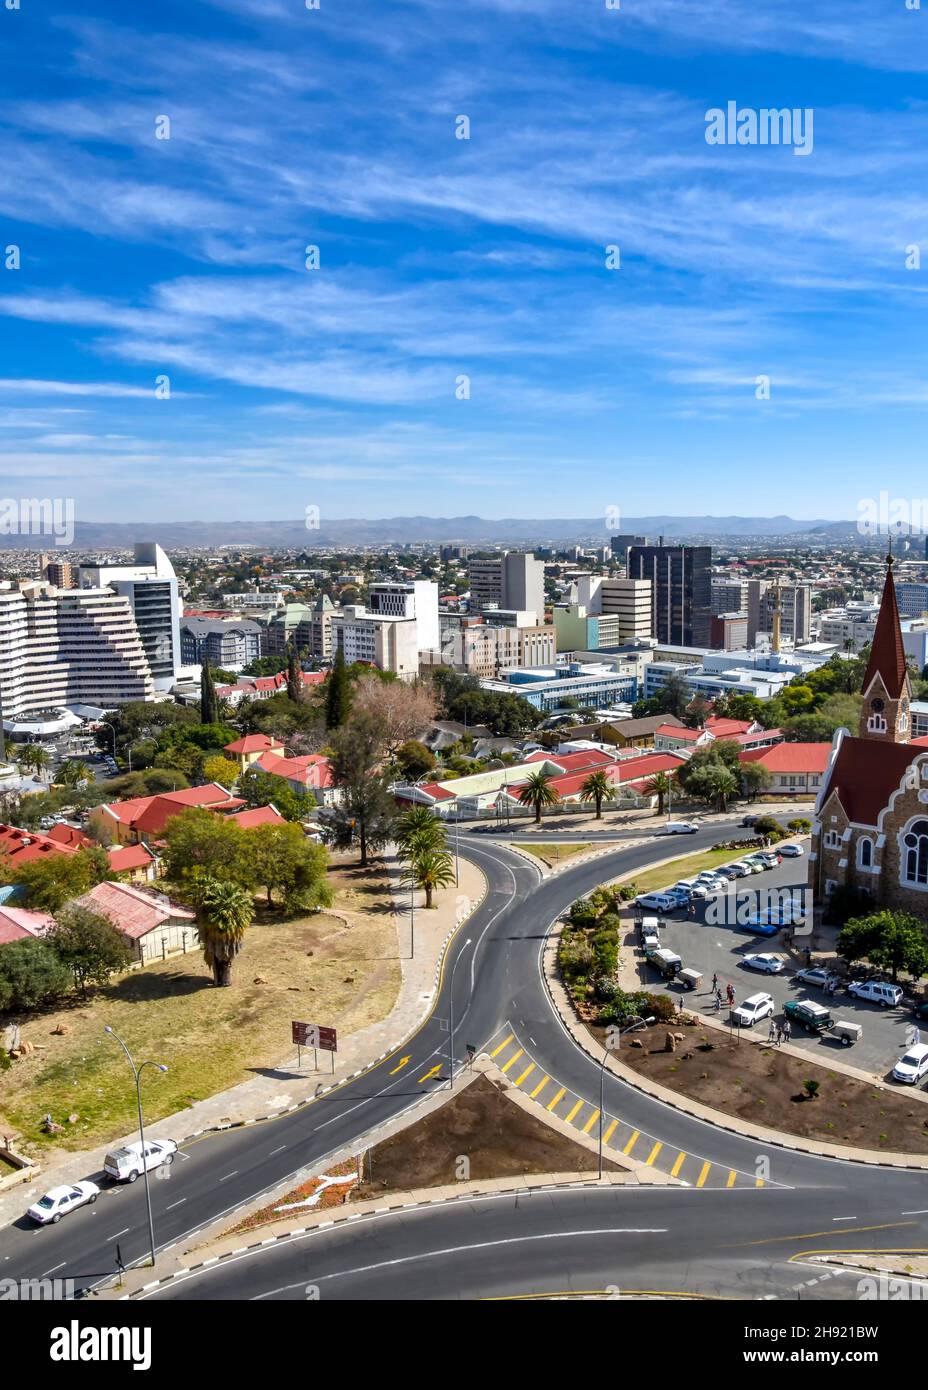 An aerial view of the center of Windhoek the capital of Namibia in Southern Africa on a beautiful bright sunny day against a blue sky Stock Photo